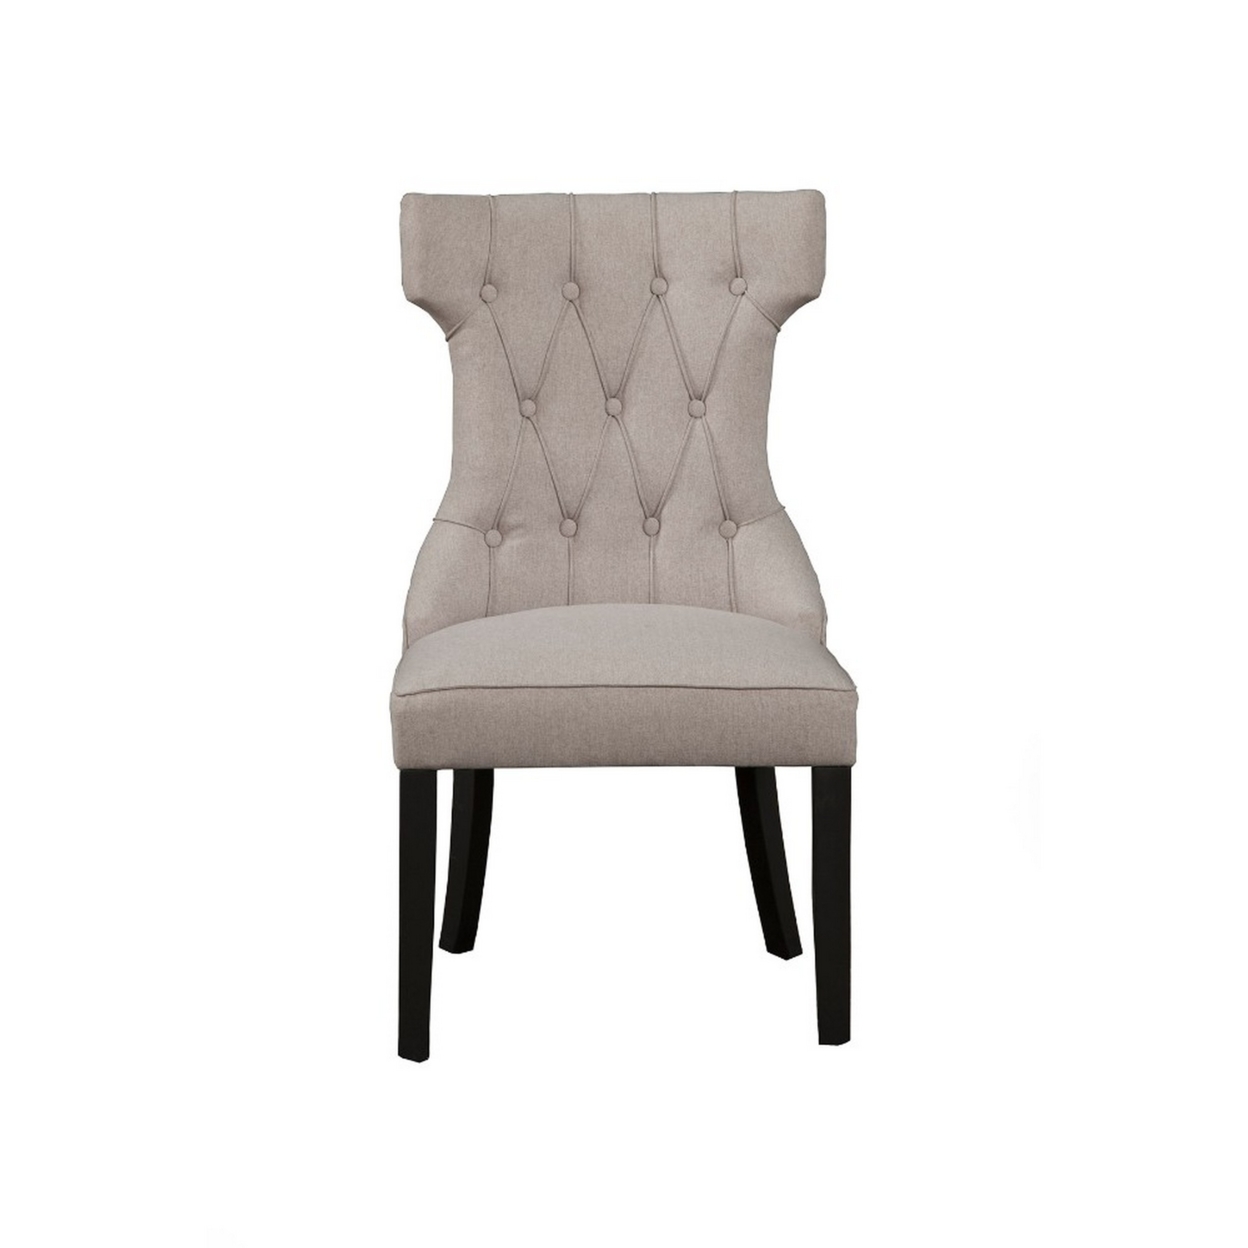 Upholstered Button Tufted Side Chairs With Wooden Base Set Of 2 Gray- Saltoro Sherpi